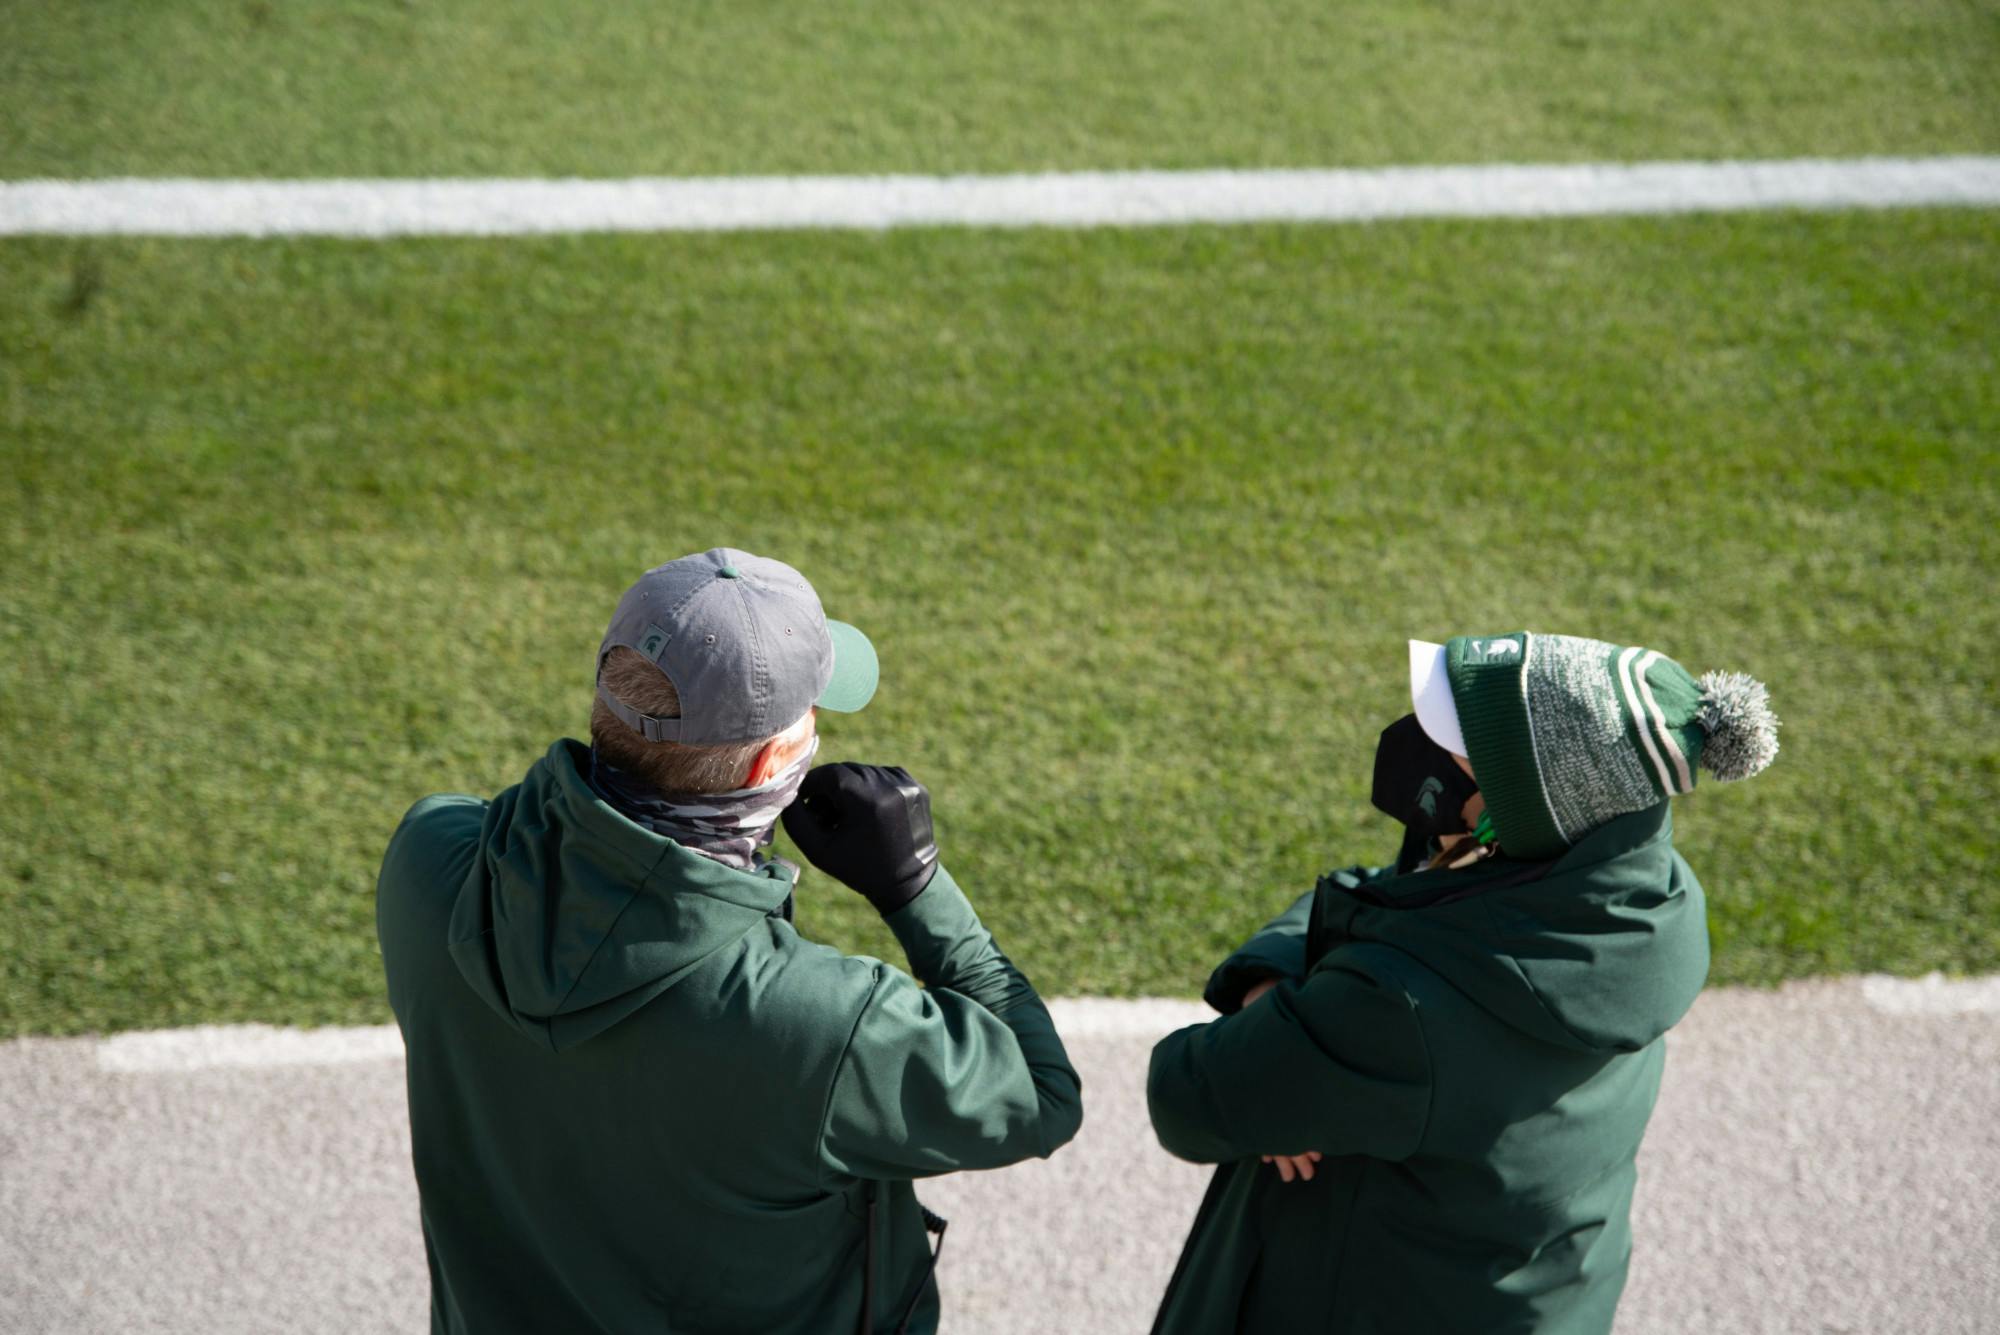 <p>Members of Spartan athletics watch the team warm up before a football game against Indiana University at Spartan Stadium on Nov. 14, 2020.</p>